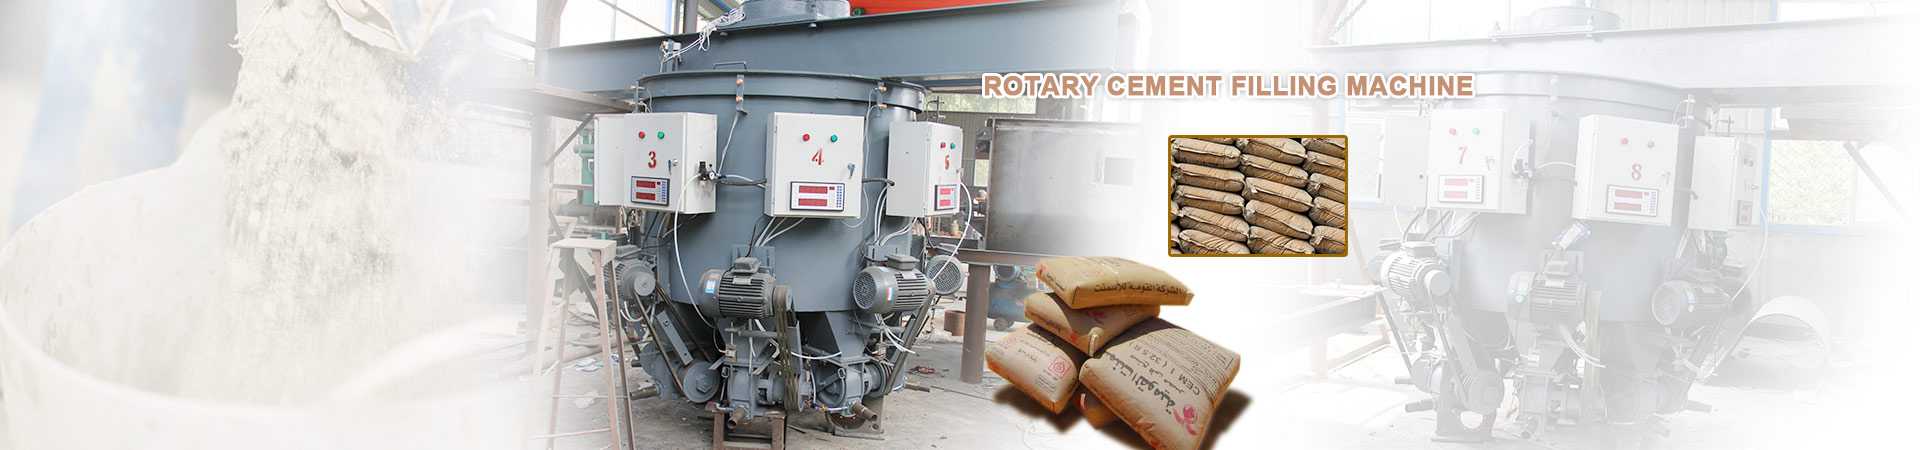 Rotary Cement Filling Machine